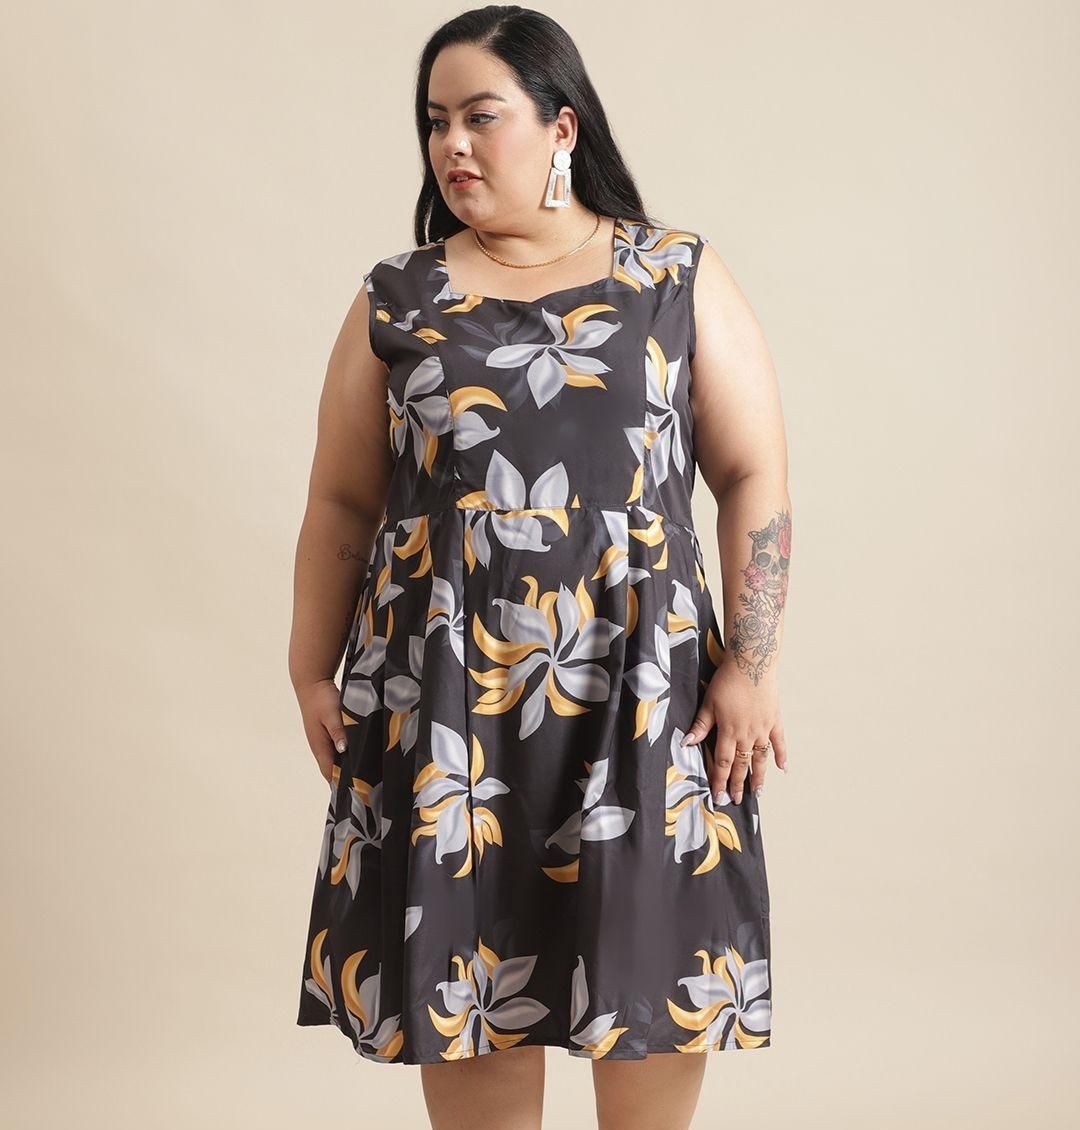 Flambeur Plus Size Floral Flared Short Dress for Women